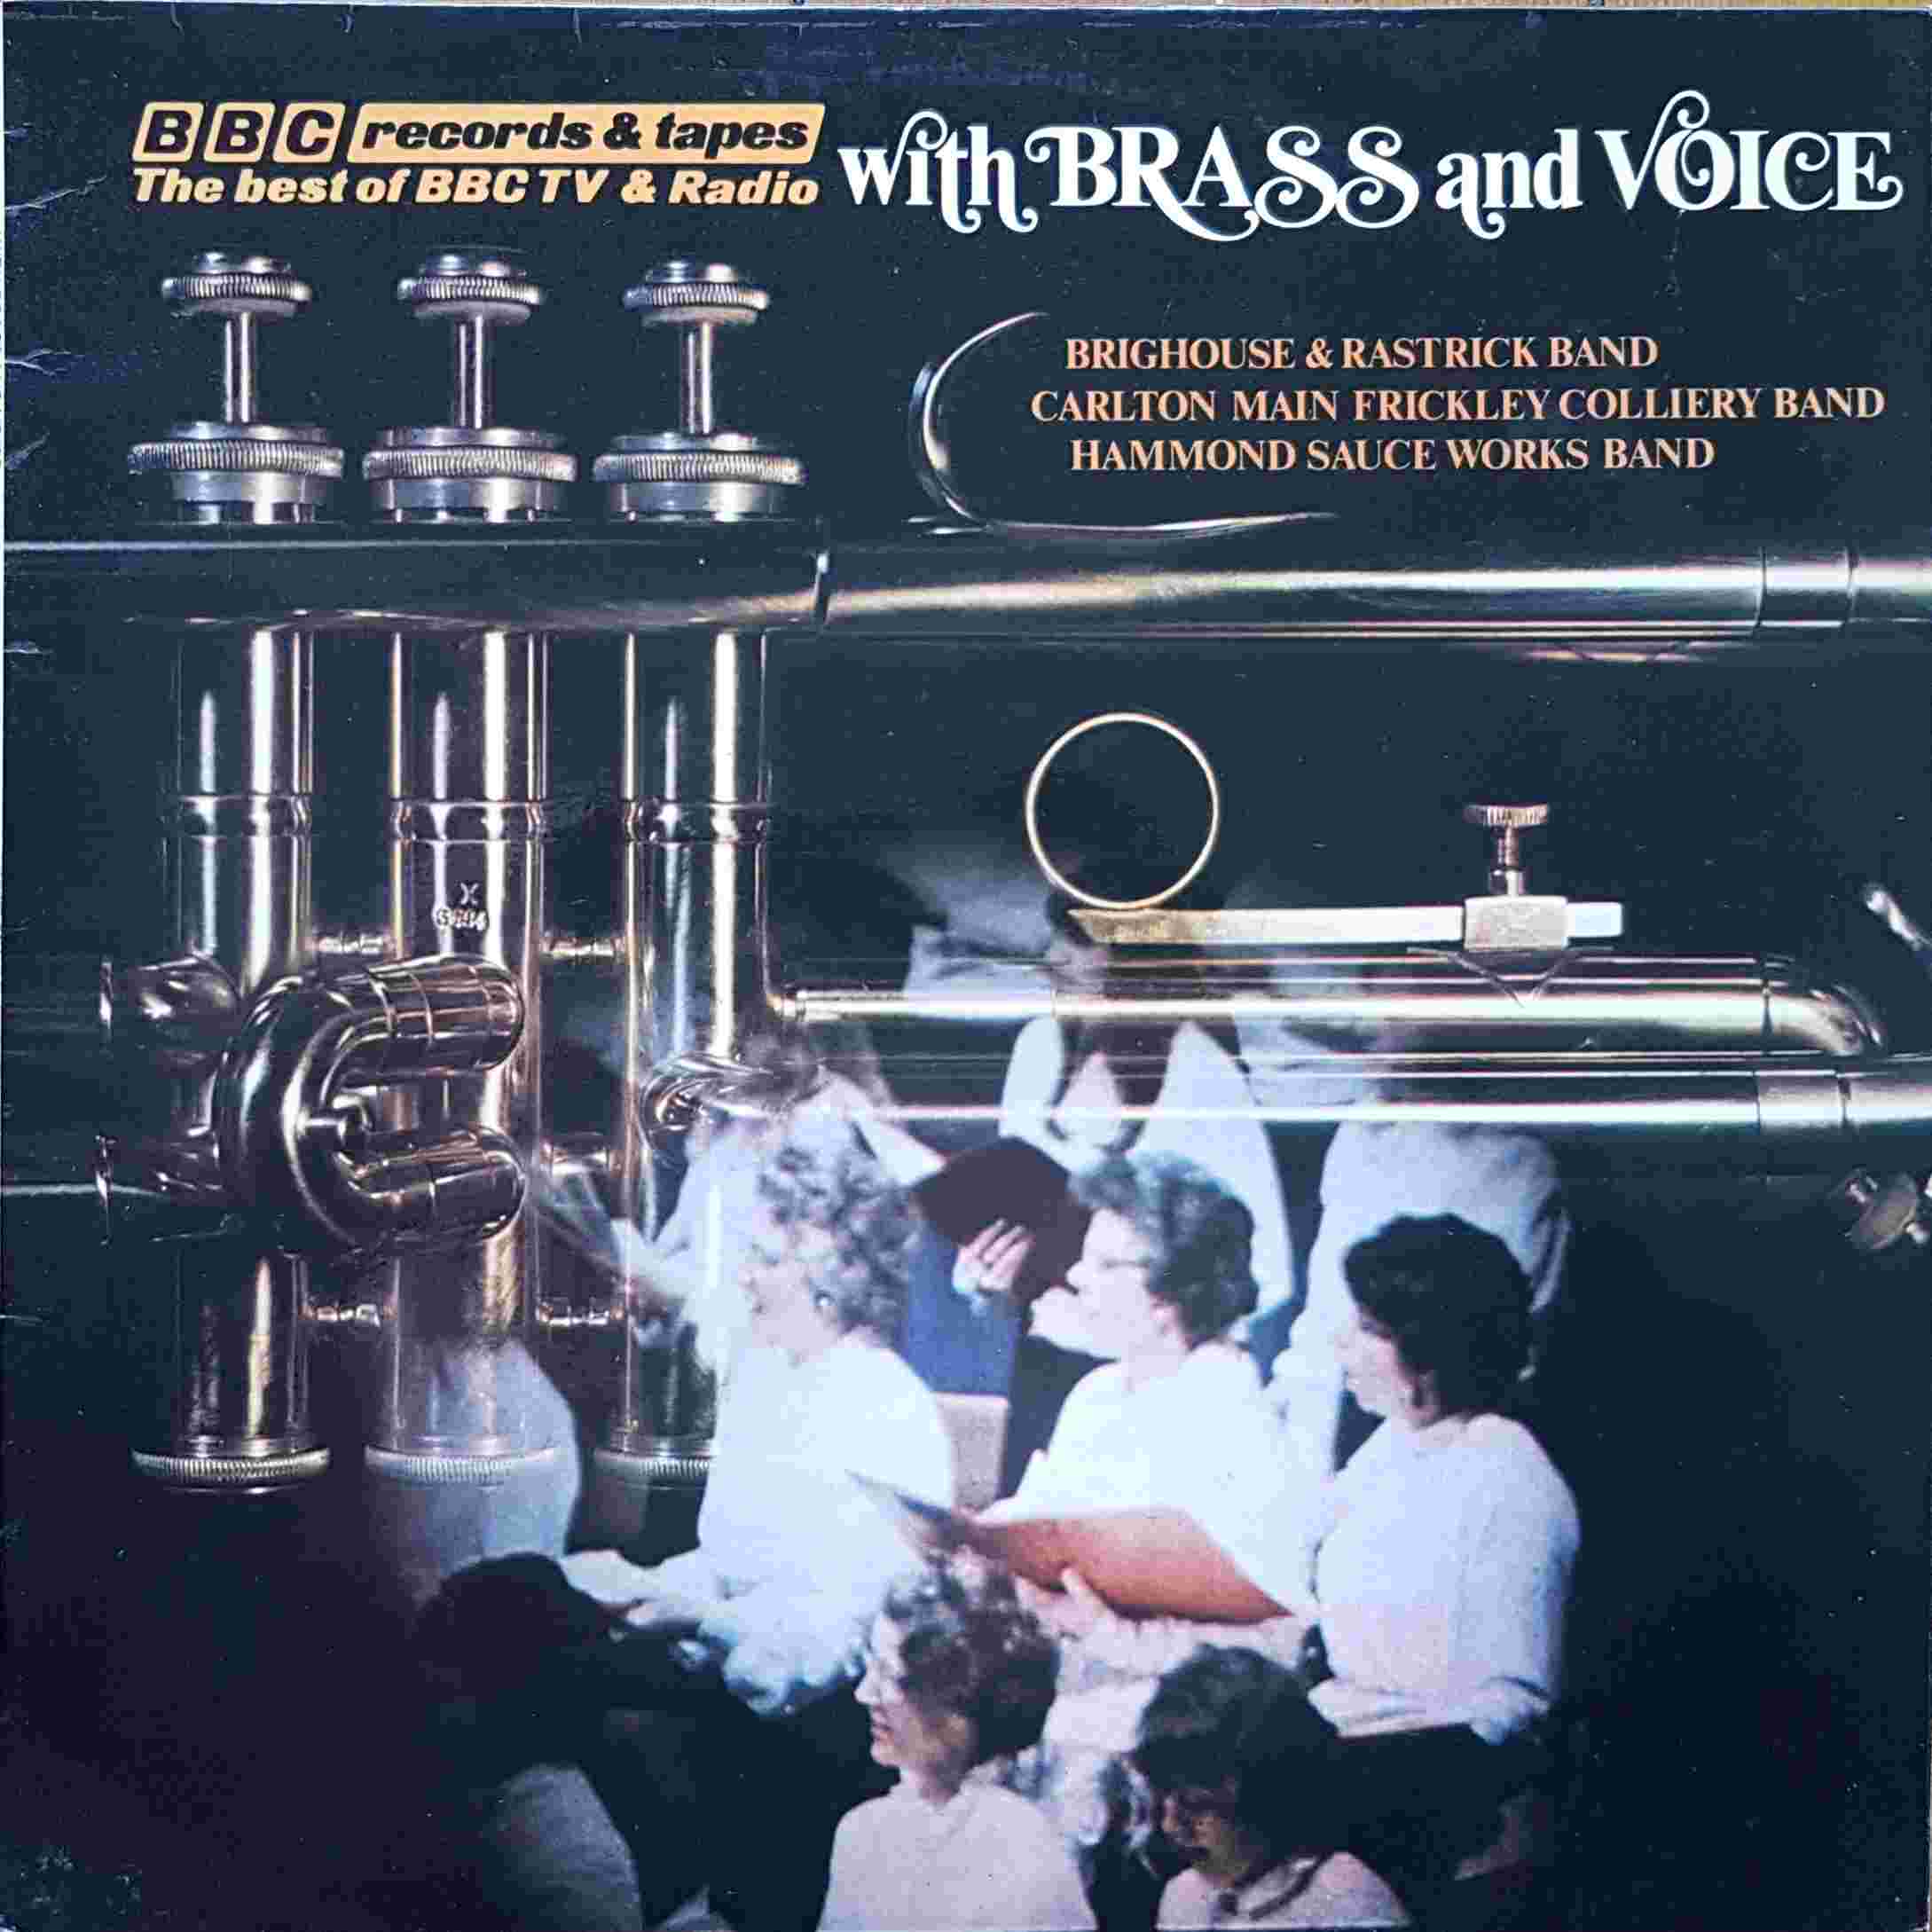 Picture of REH 207 With brass and voice by artist Various from the BBC albums - Records and Tapes library